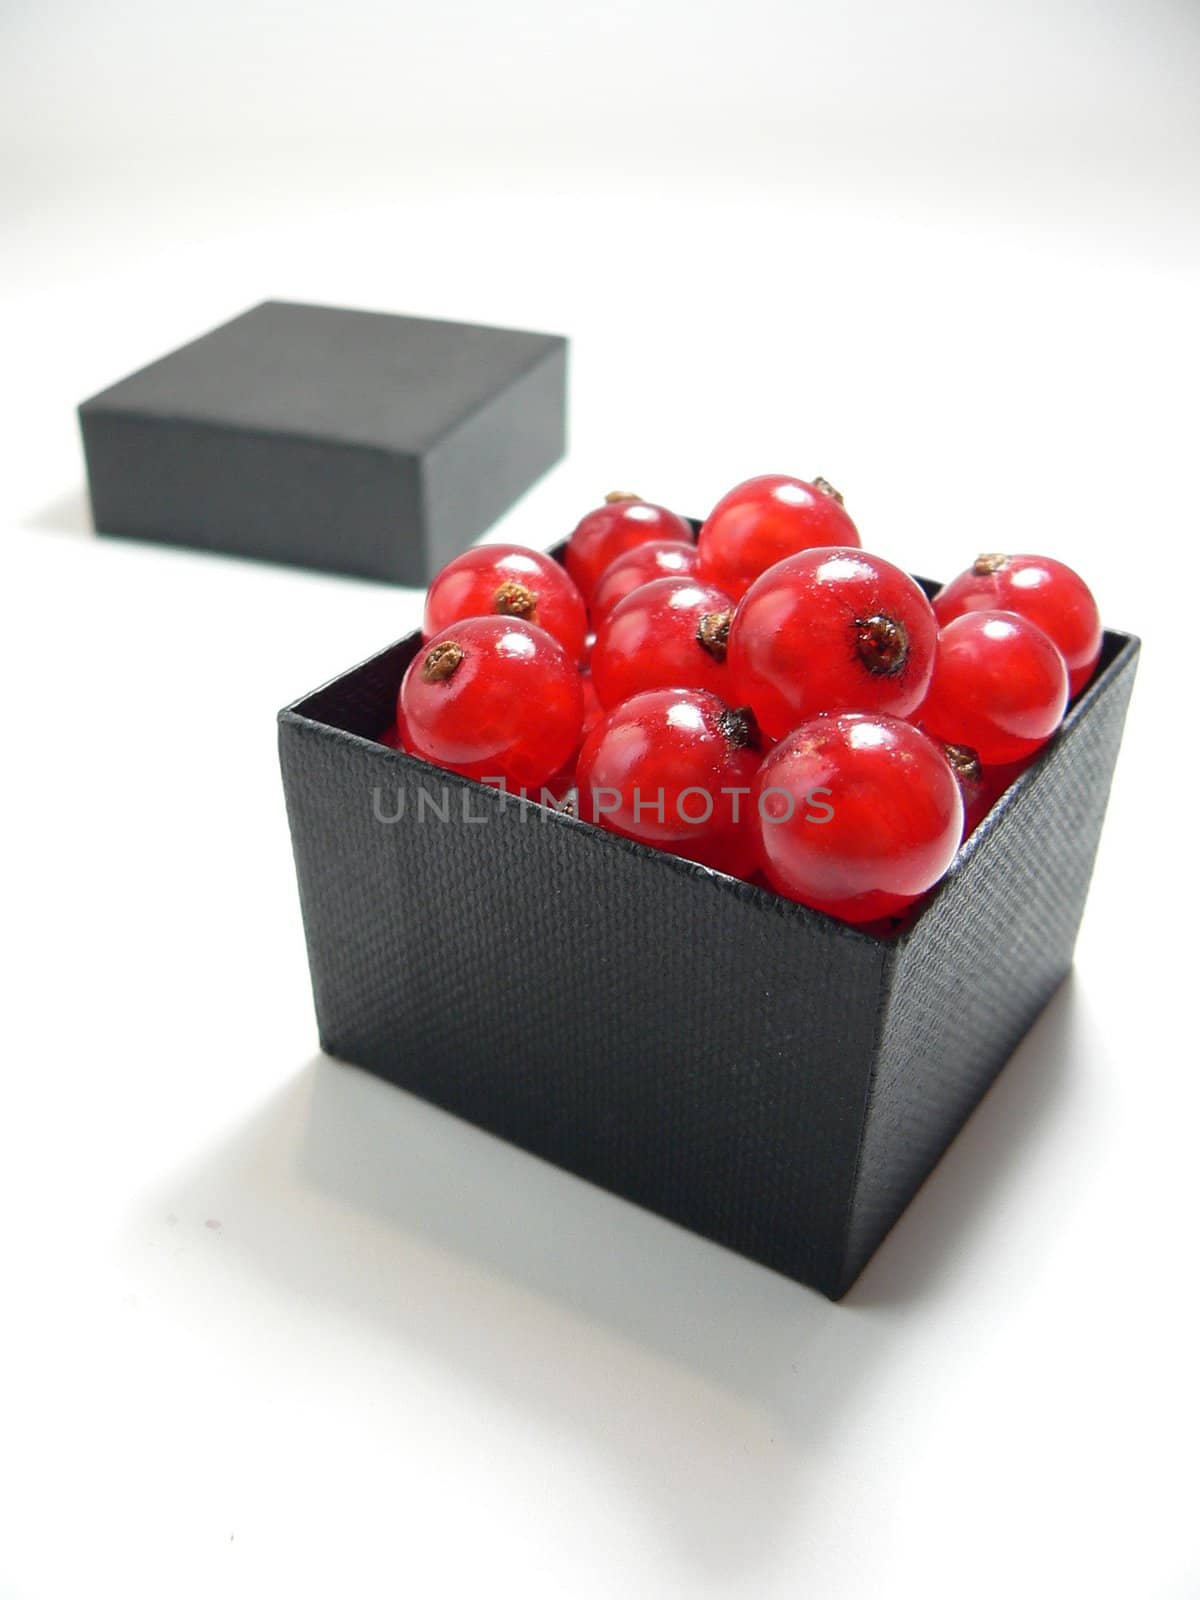 red ribes berries in a black box